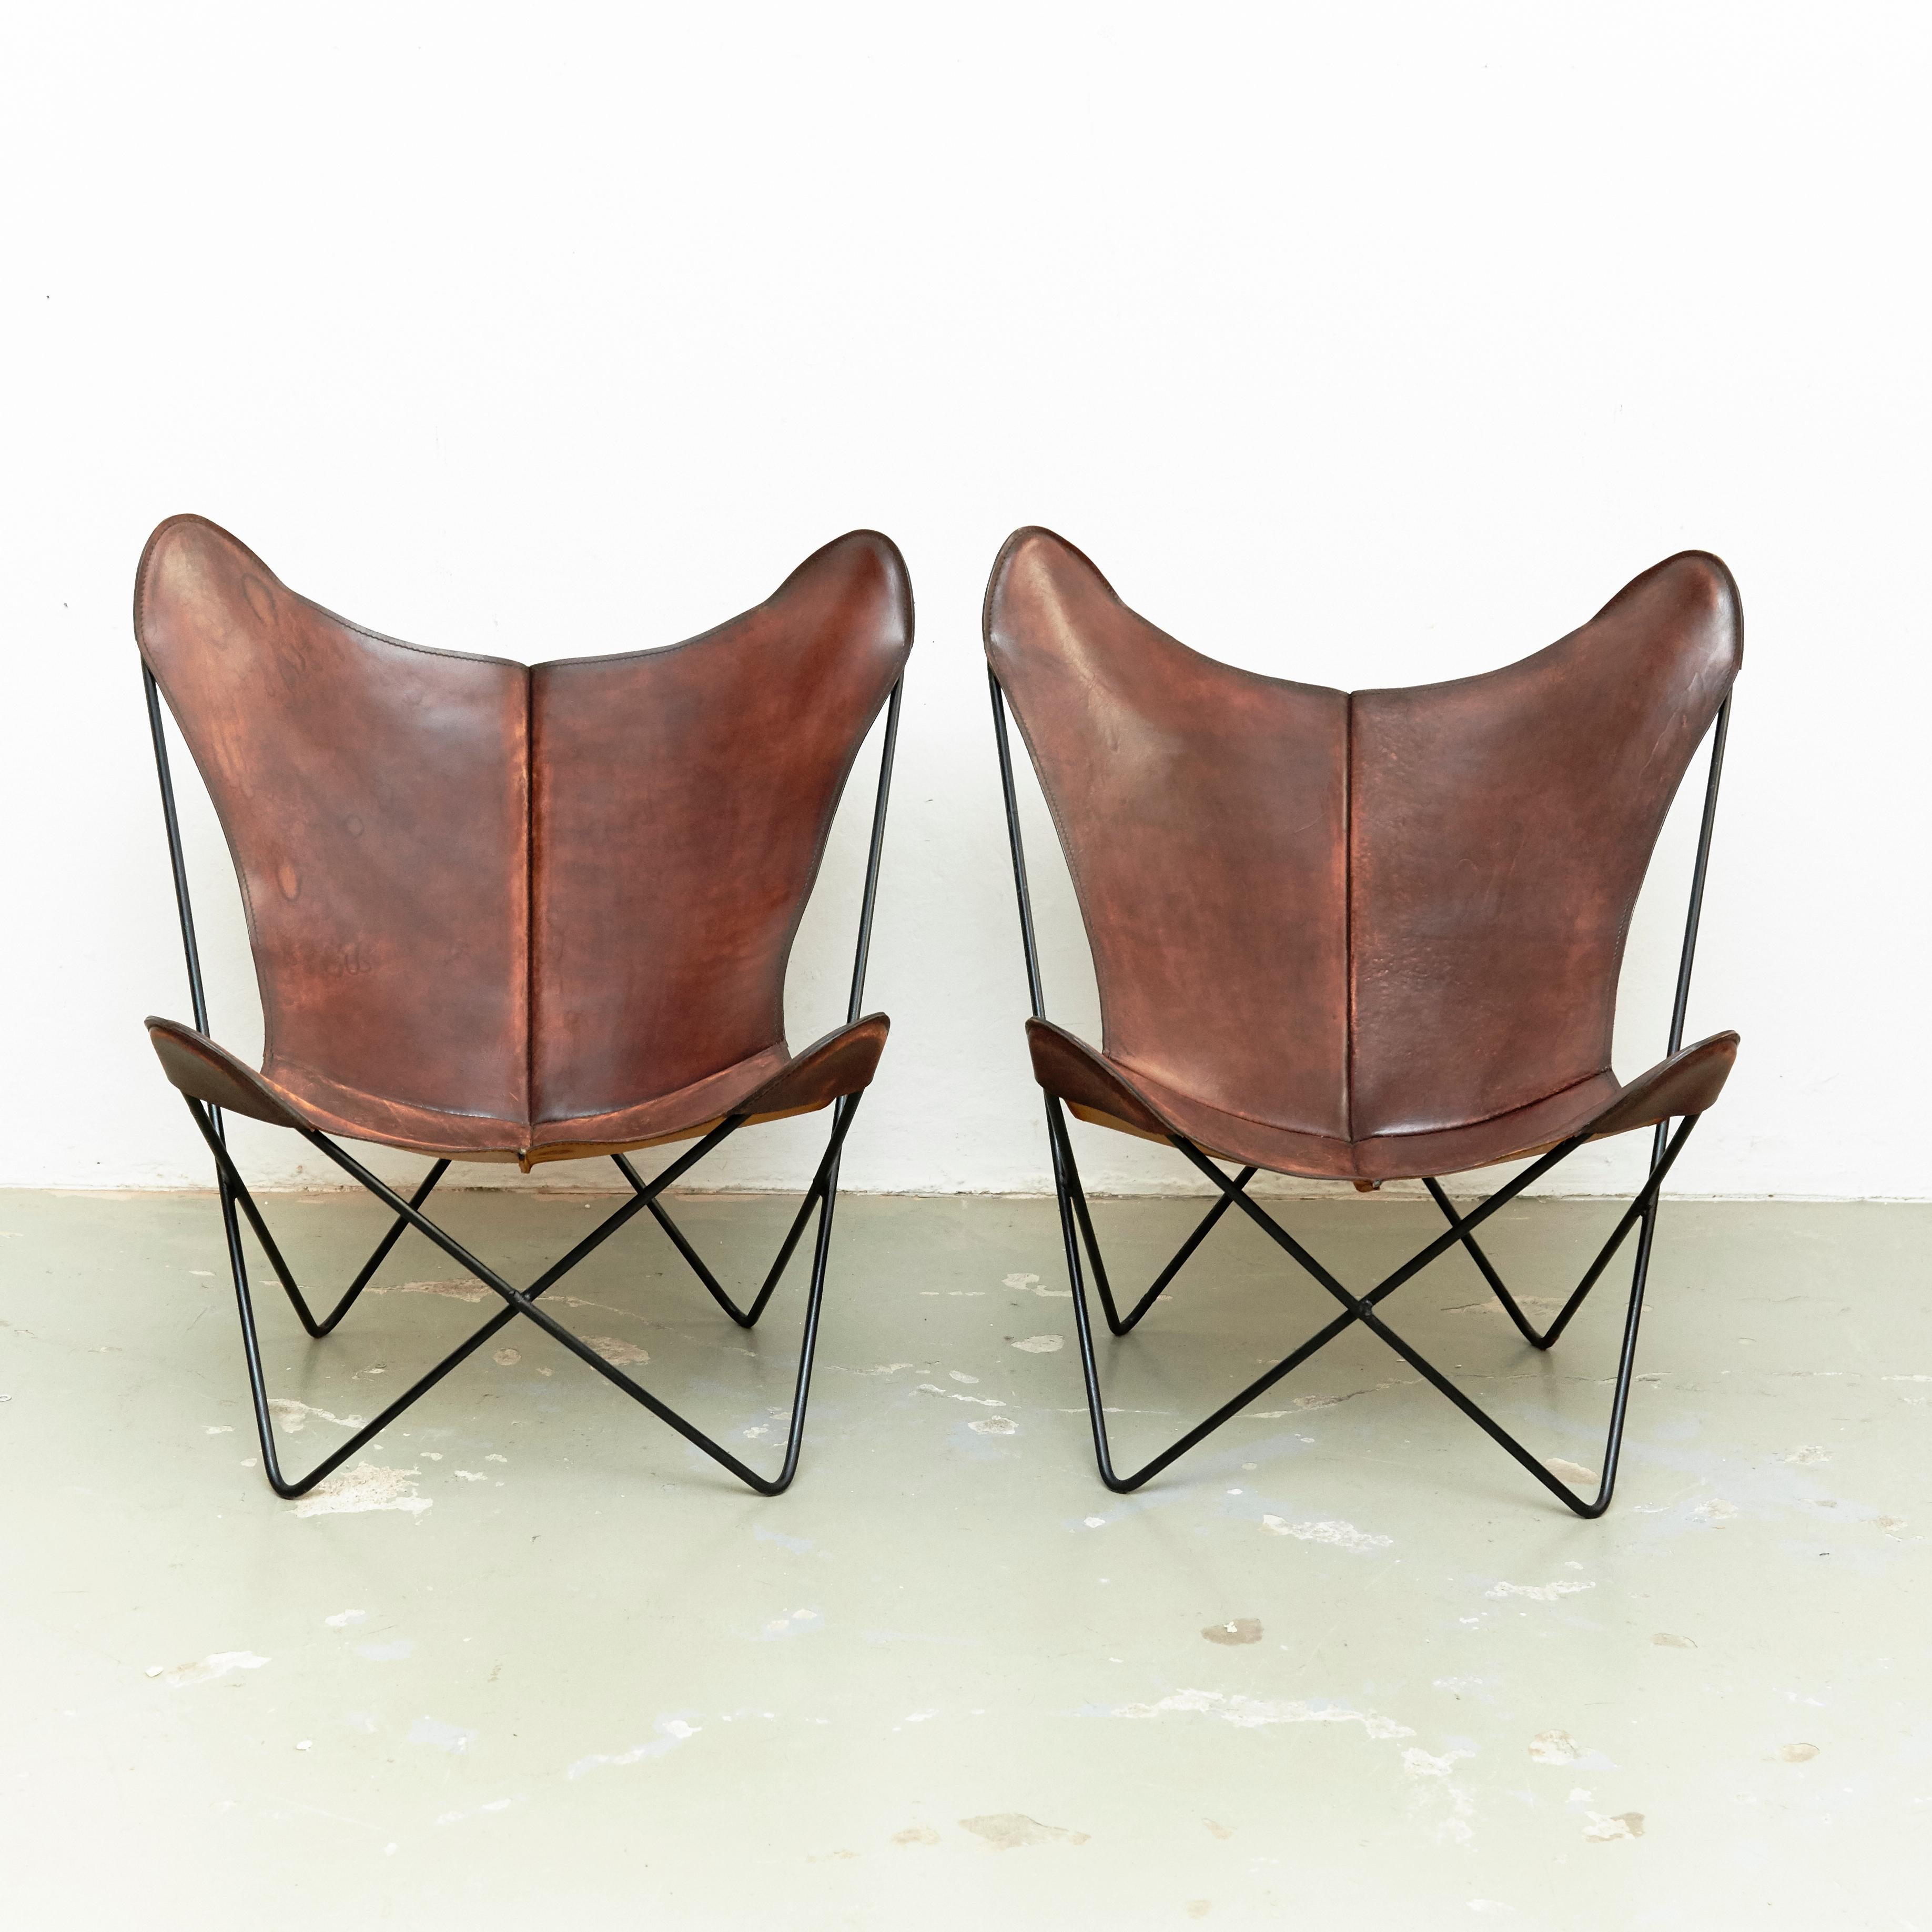 BKF butterfly lounge chair design by Pep Bonet, circa 1980

Leather metal frame

In good original condition, with minor wear consistent with age and use, preserving a beautiful patina.

The BKF chair, also known as the Butterfly chair, was